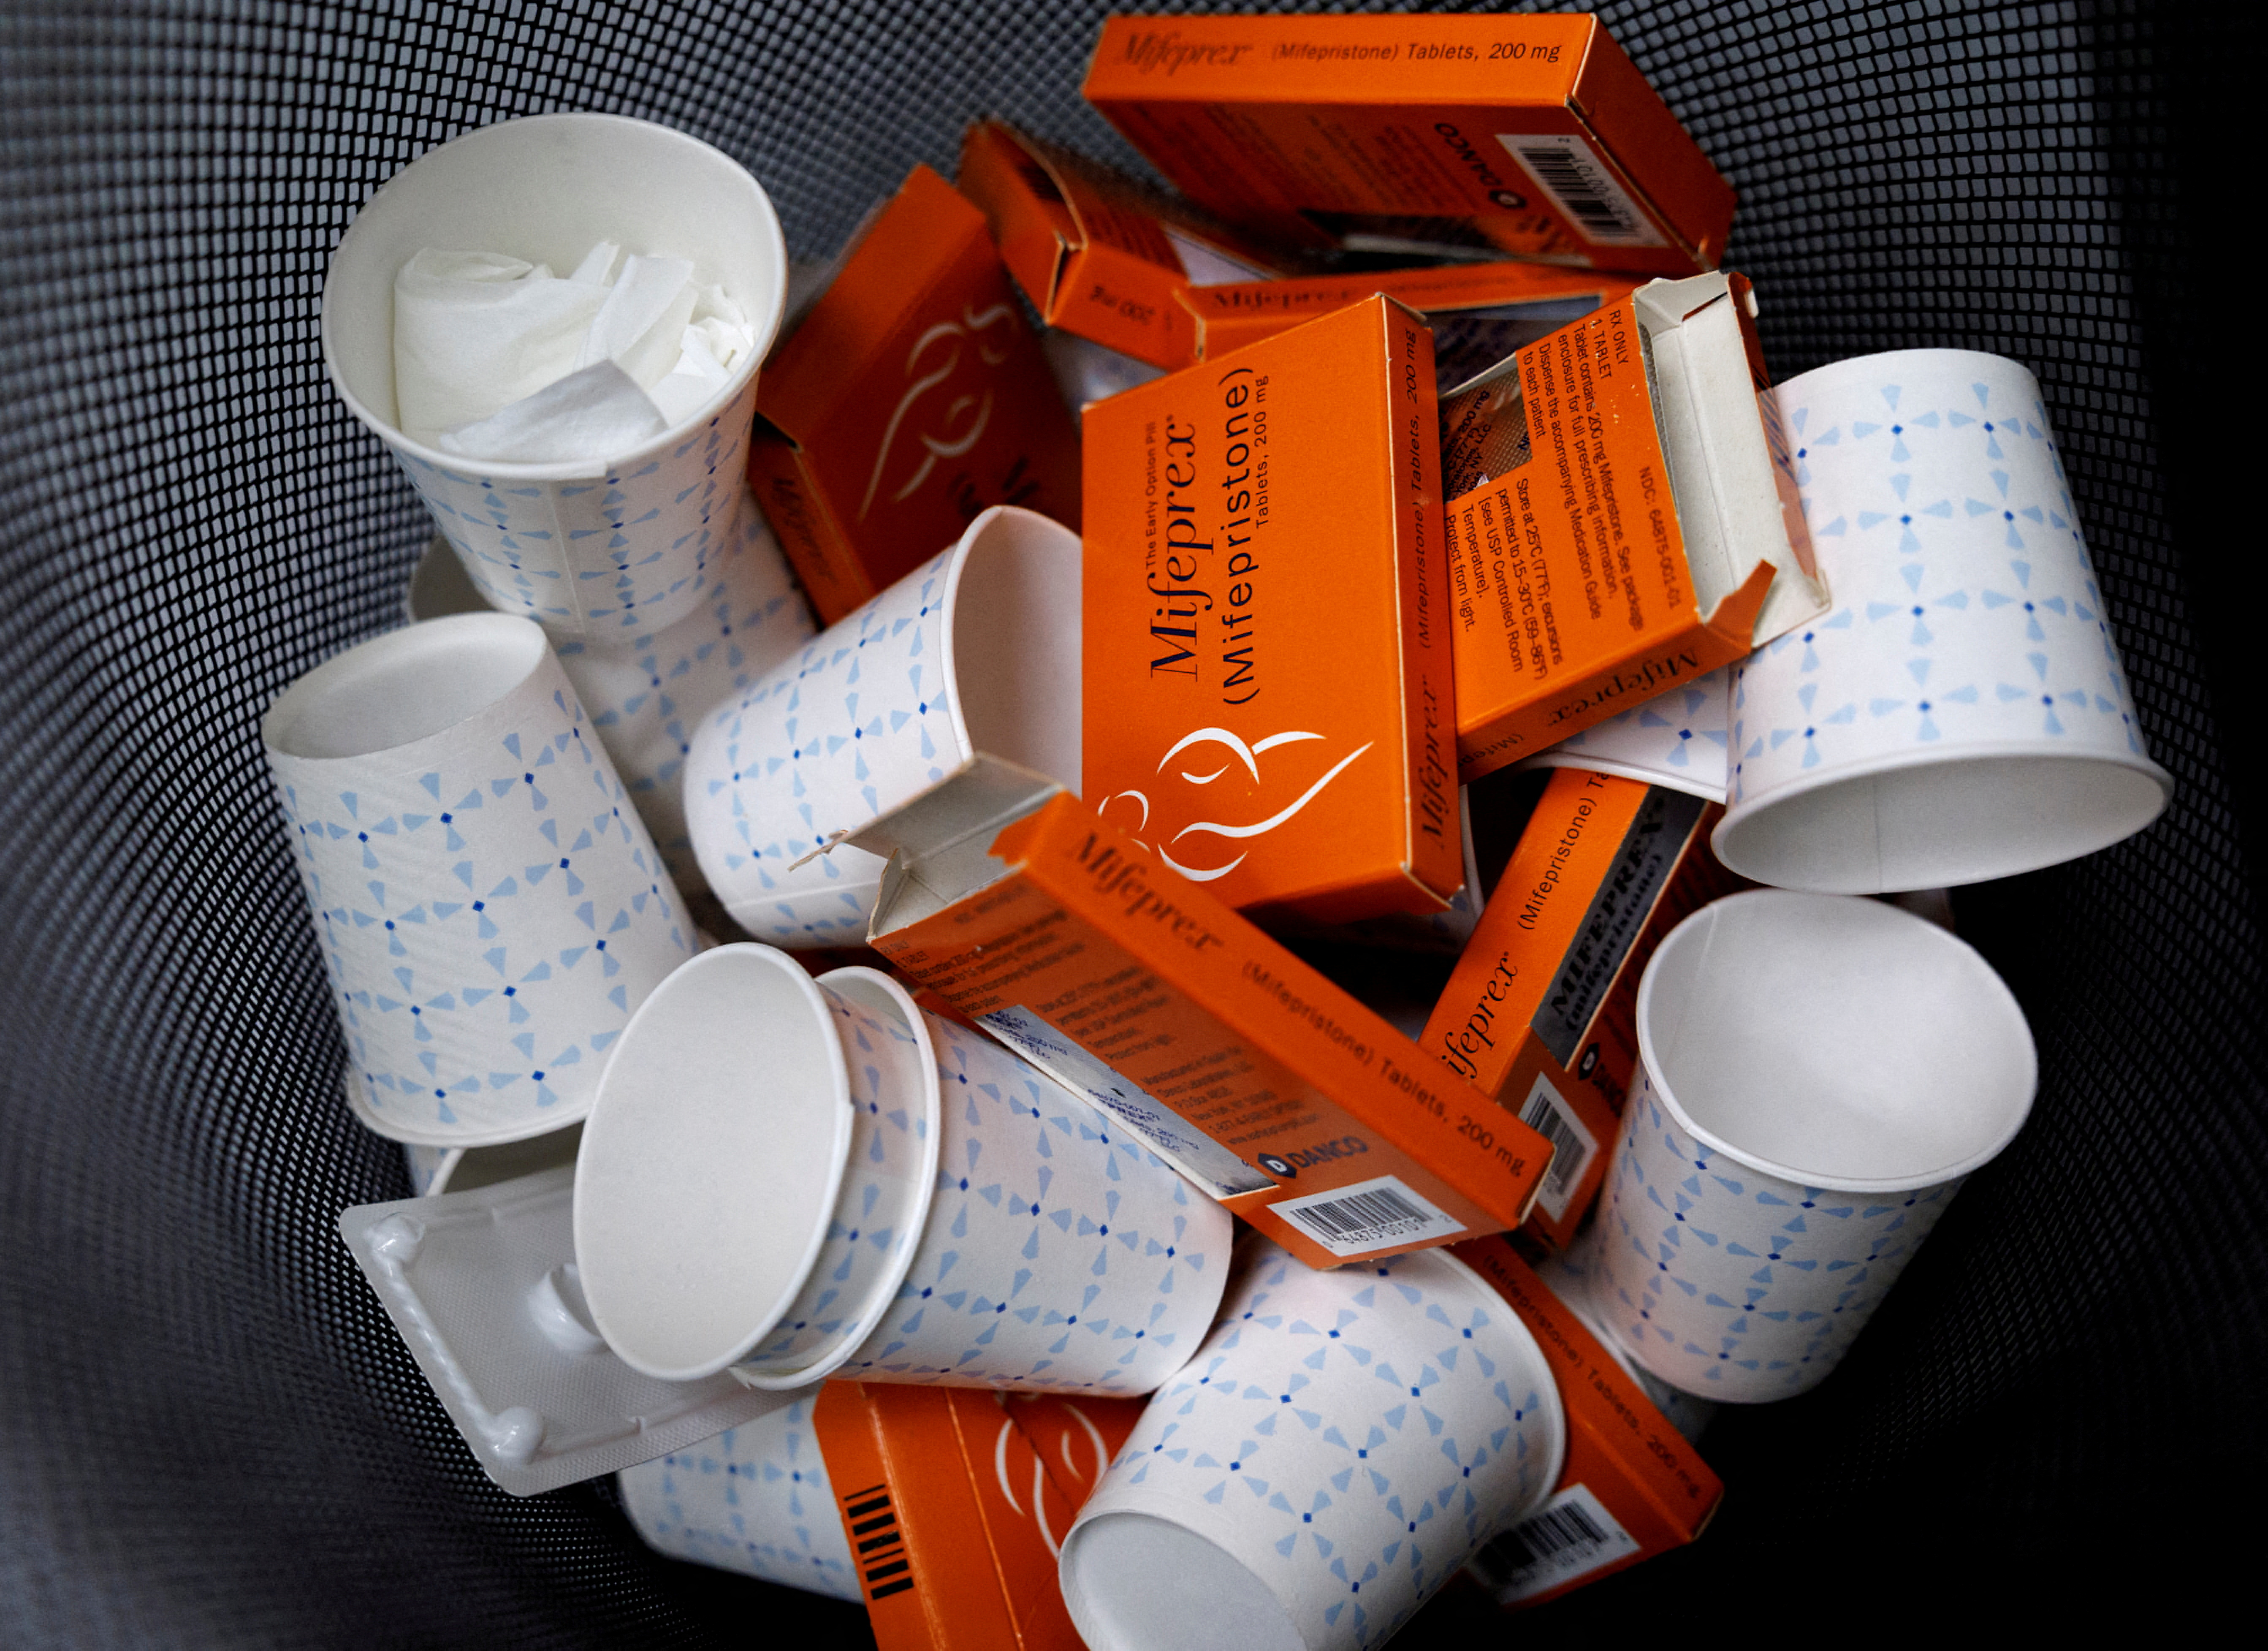 Used boxes of Mifepristone pills, the first drug used in a medical abortion, fill a trash can at Alamo Women's Clinic in New Mexico